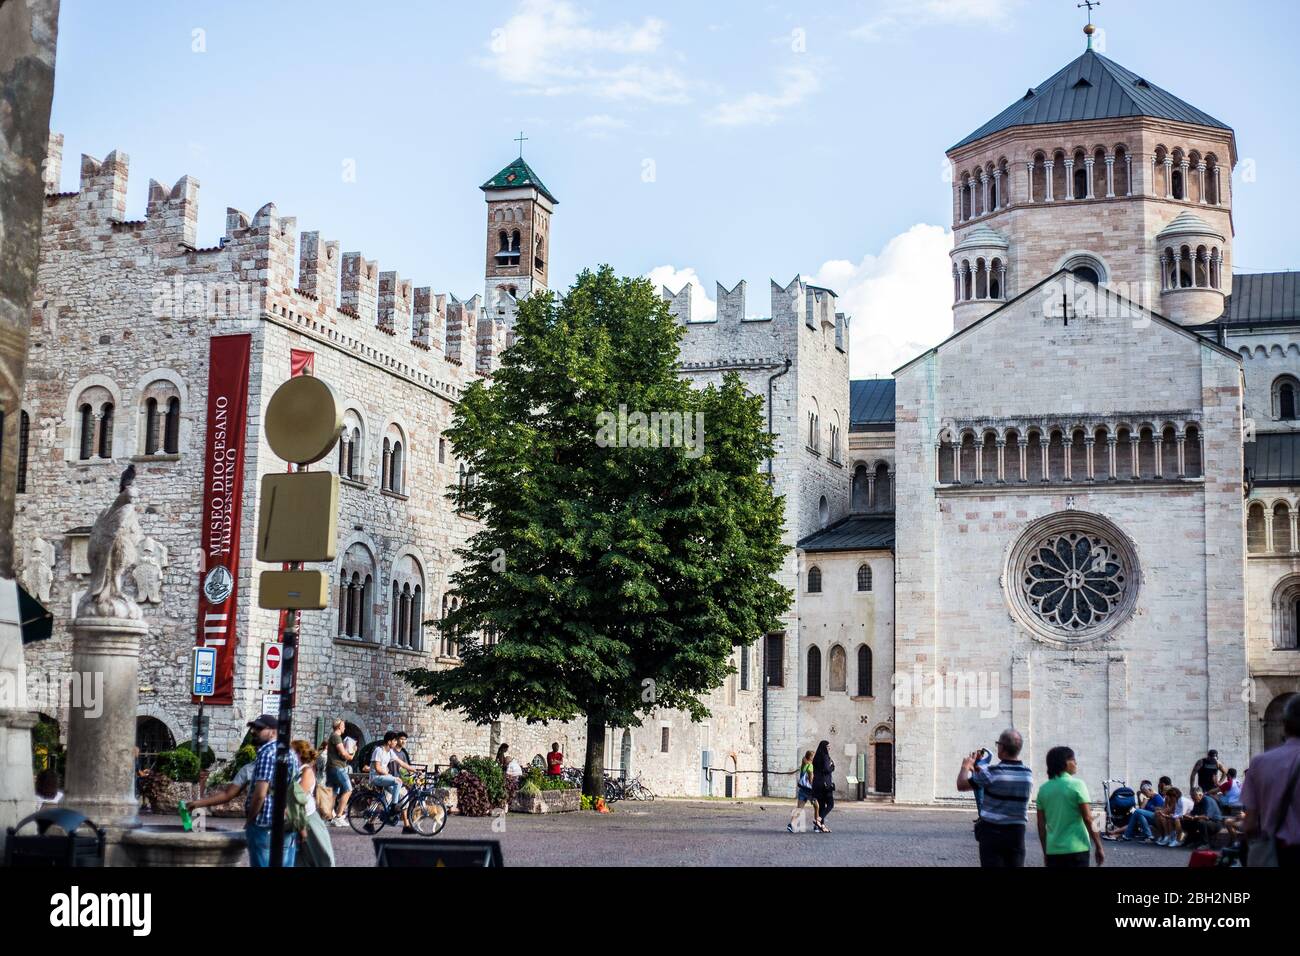 Trento, Italy - August 15, 2019: View of Trento Cathedral and Old Town in Summer Stock Photo